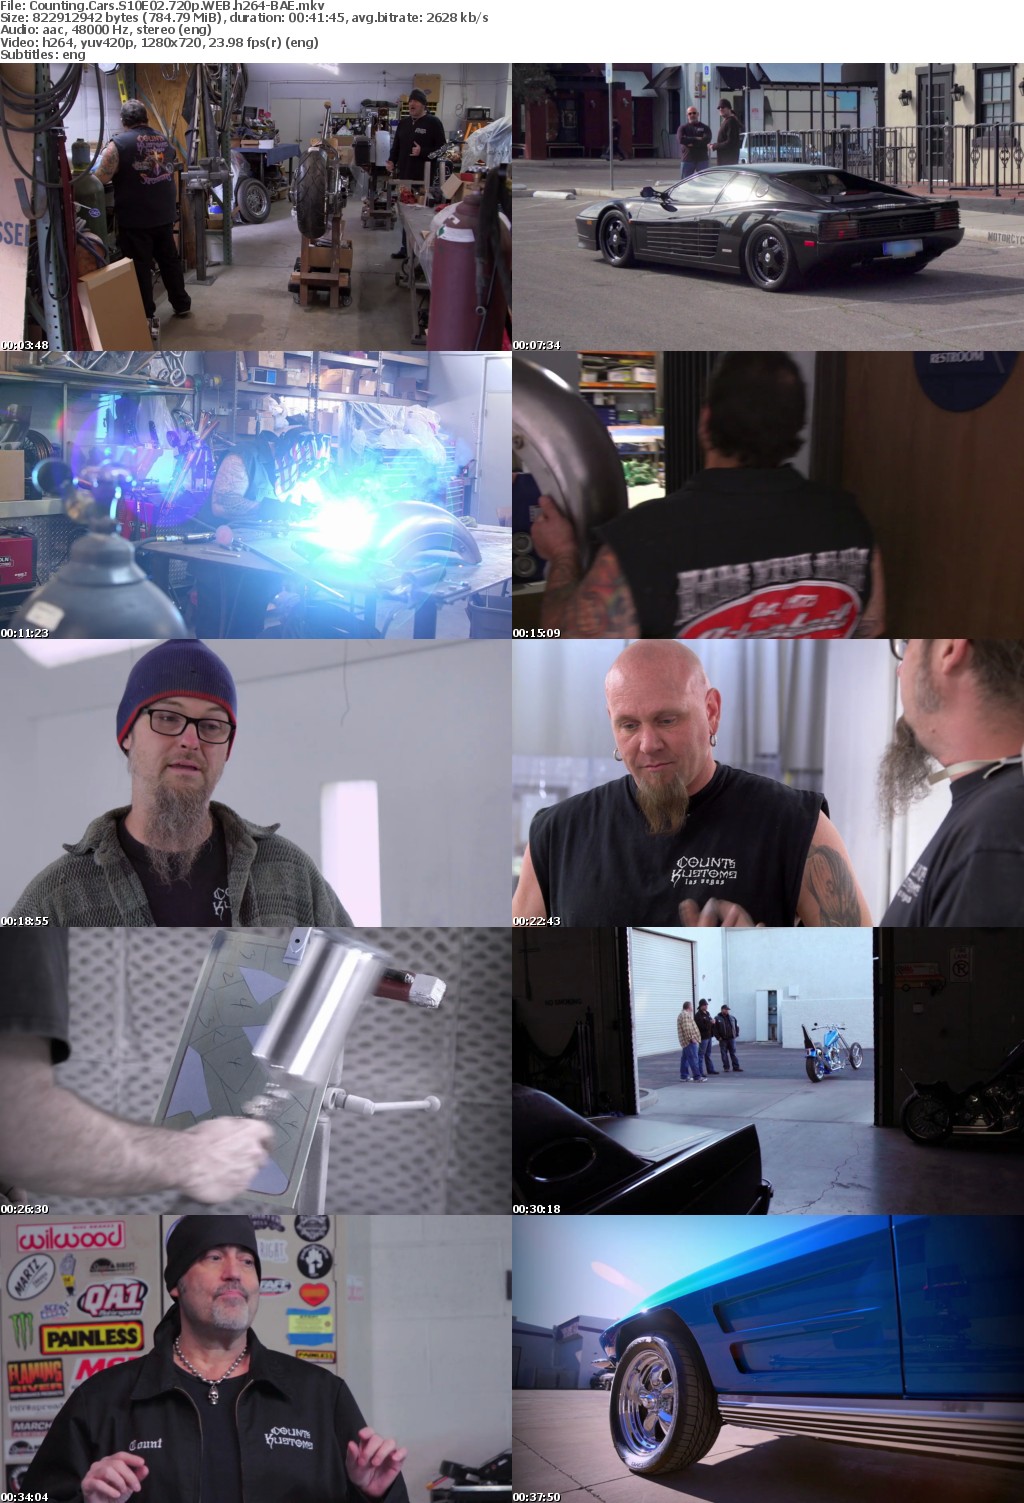 Counting Cars S10E02 720p WEB h264-BAE